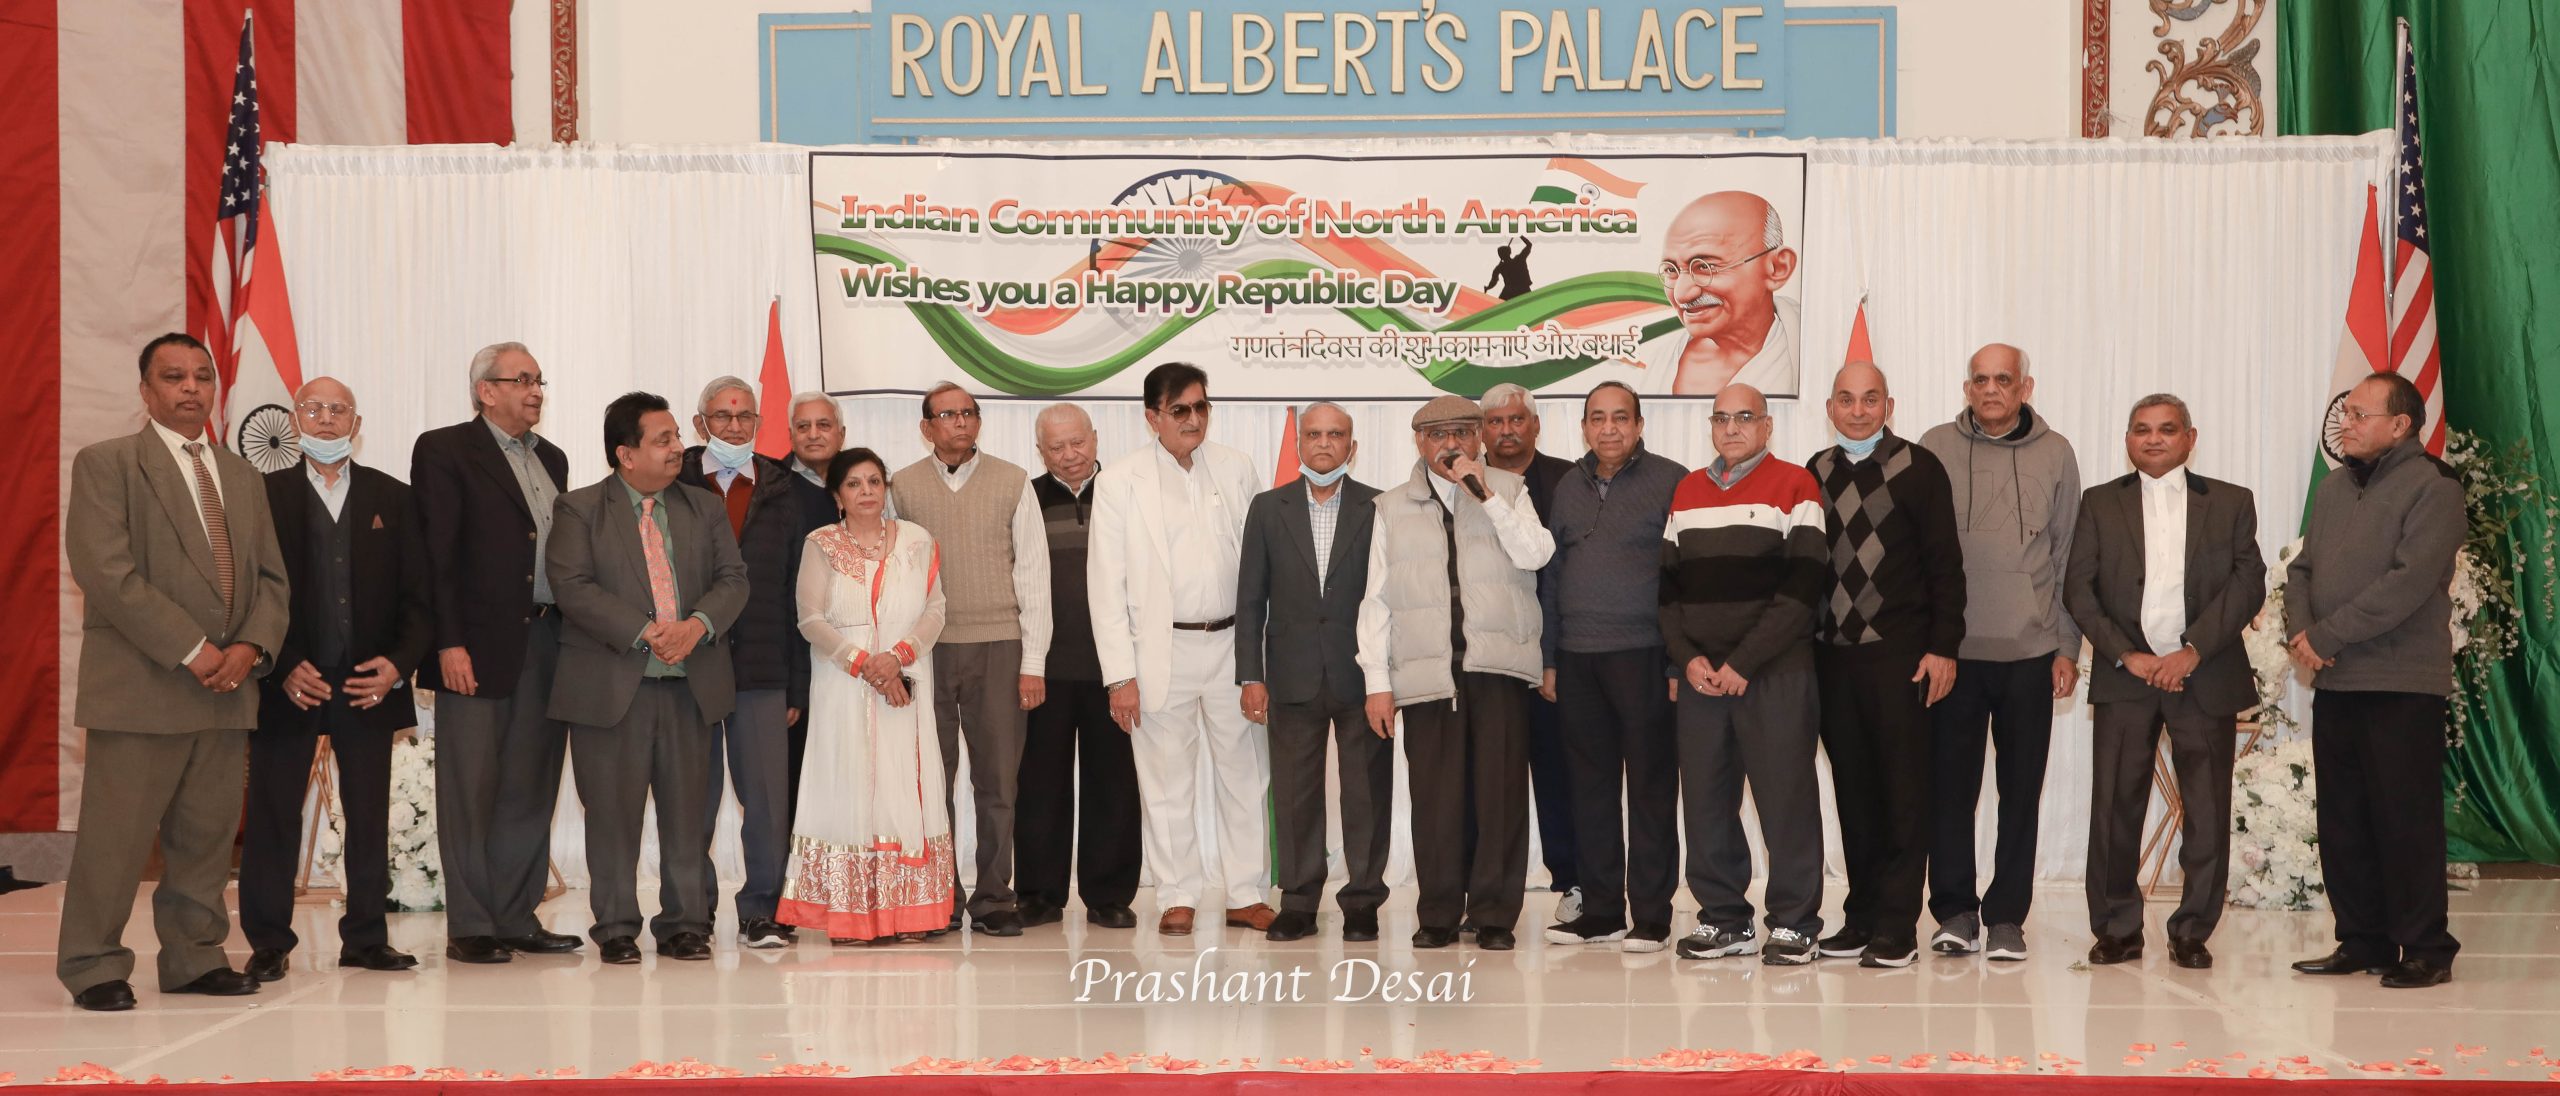 IACONA hosts and celebrates Indian Republic Day at the Royal Albert’s Palace